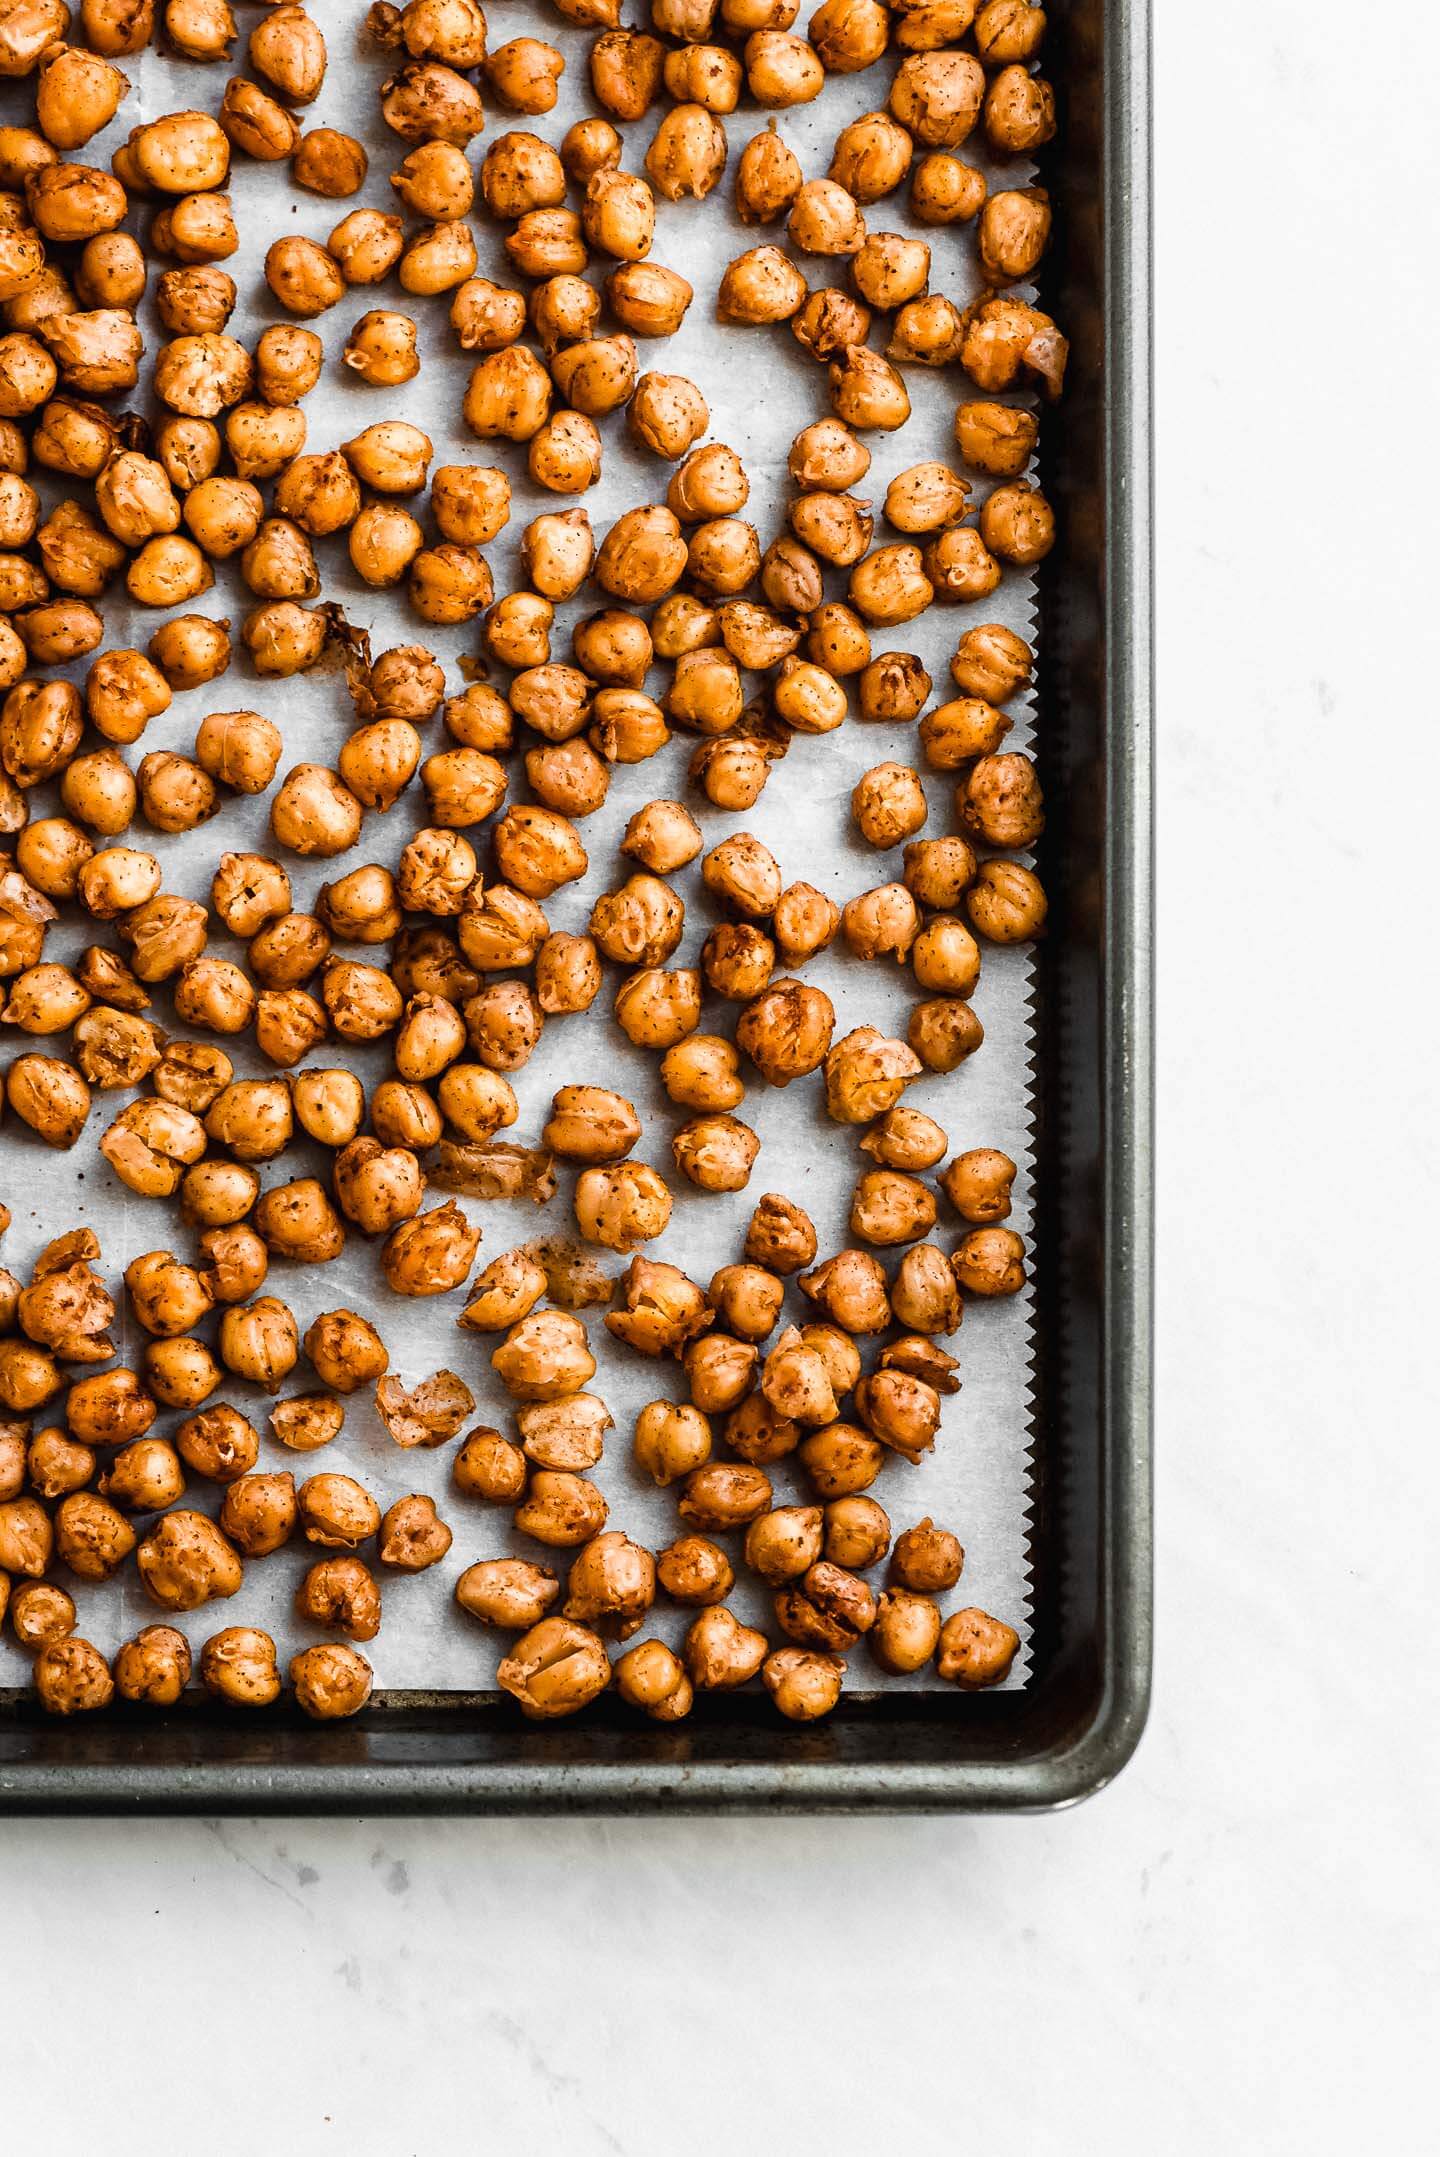 Roasted Chickpeas on a parchment lined baking sheet seasoned with spices.